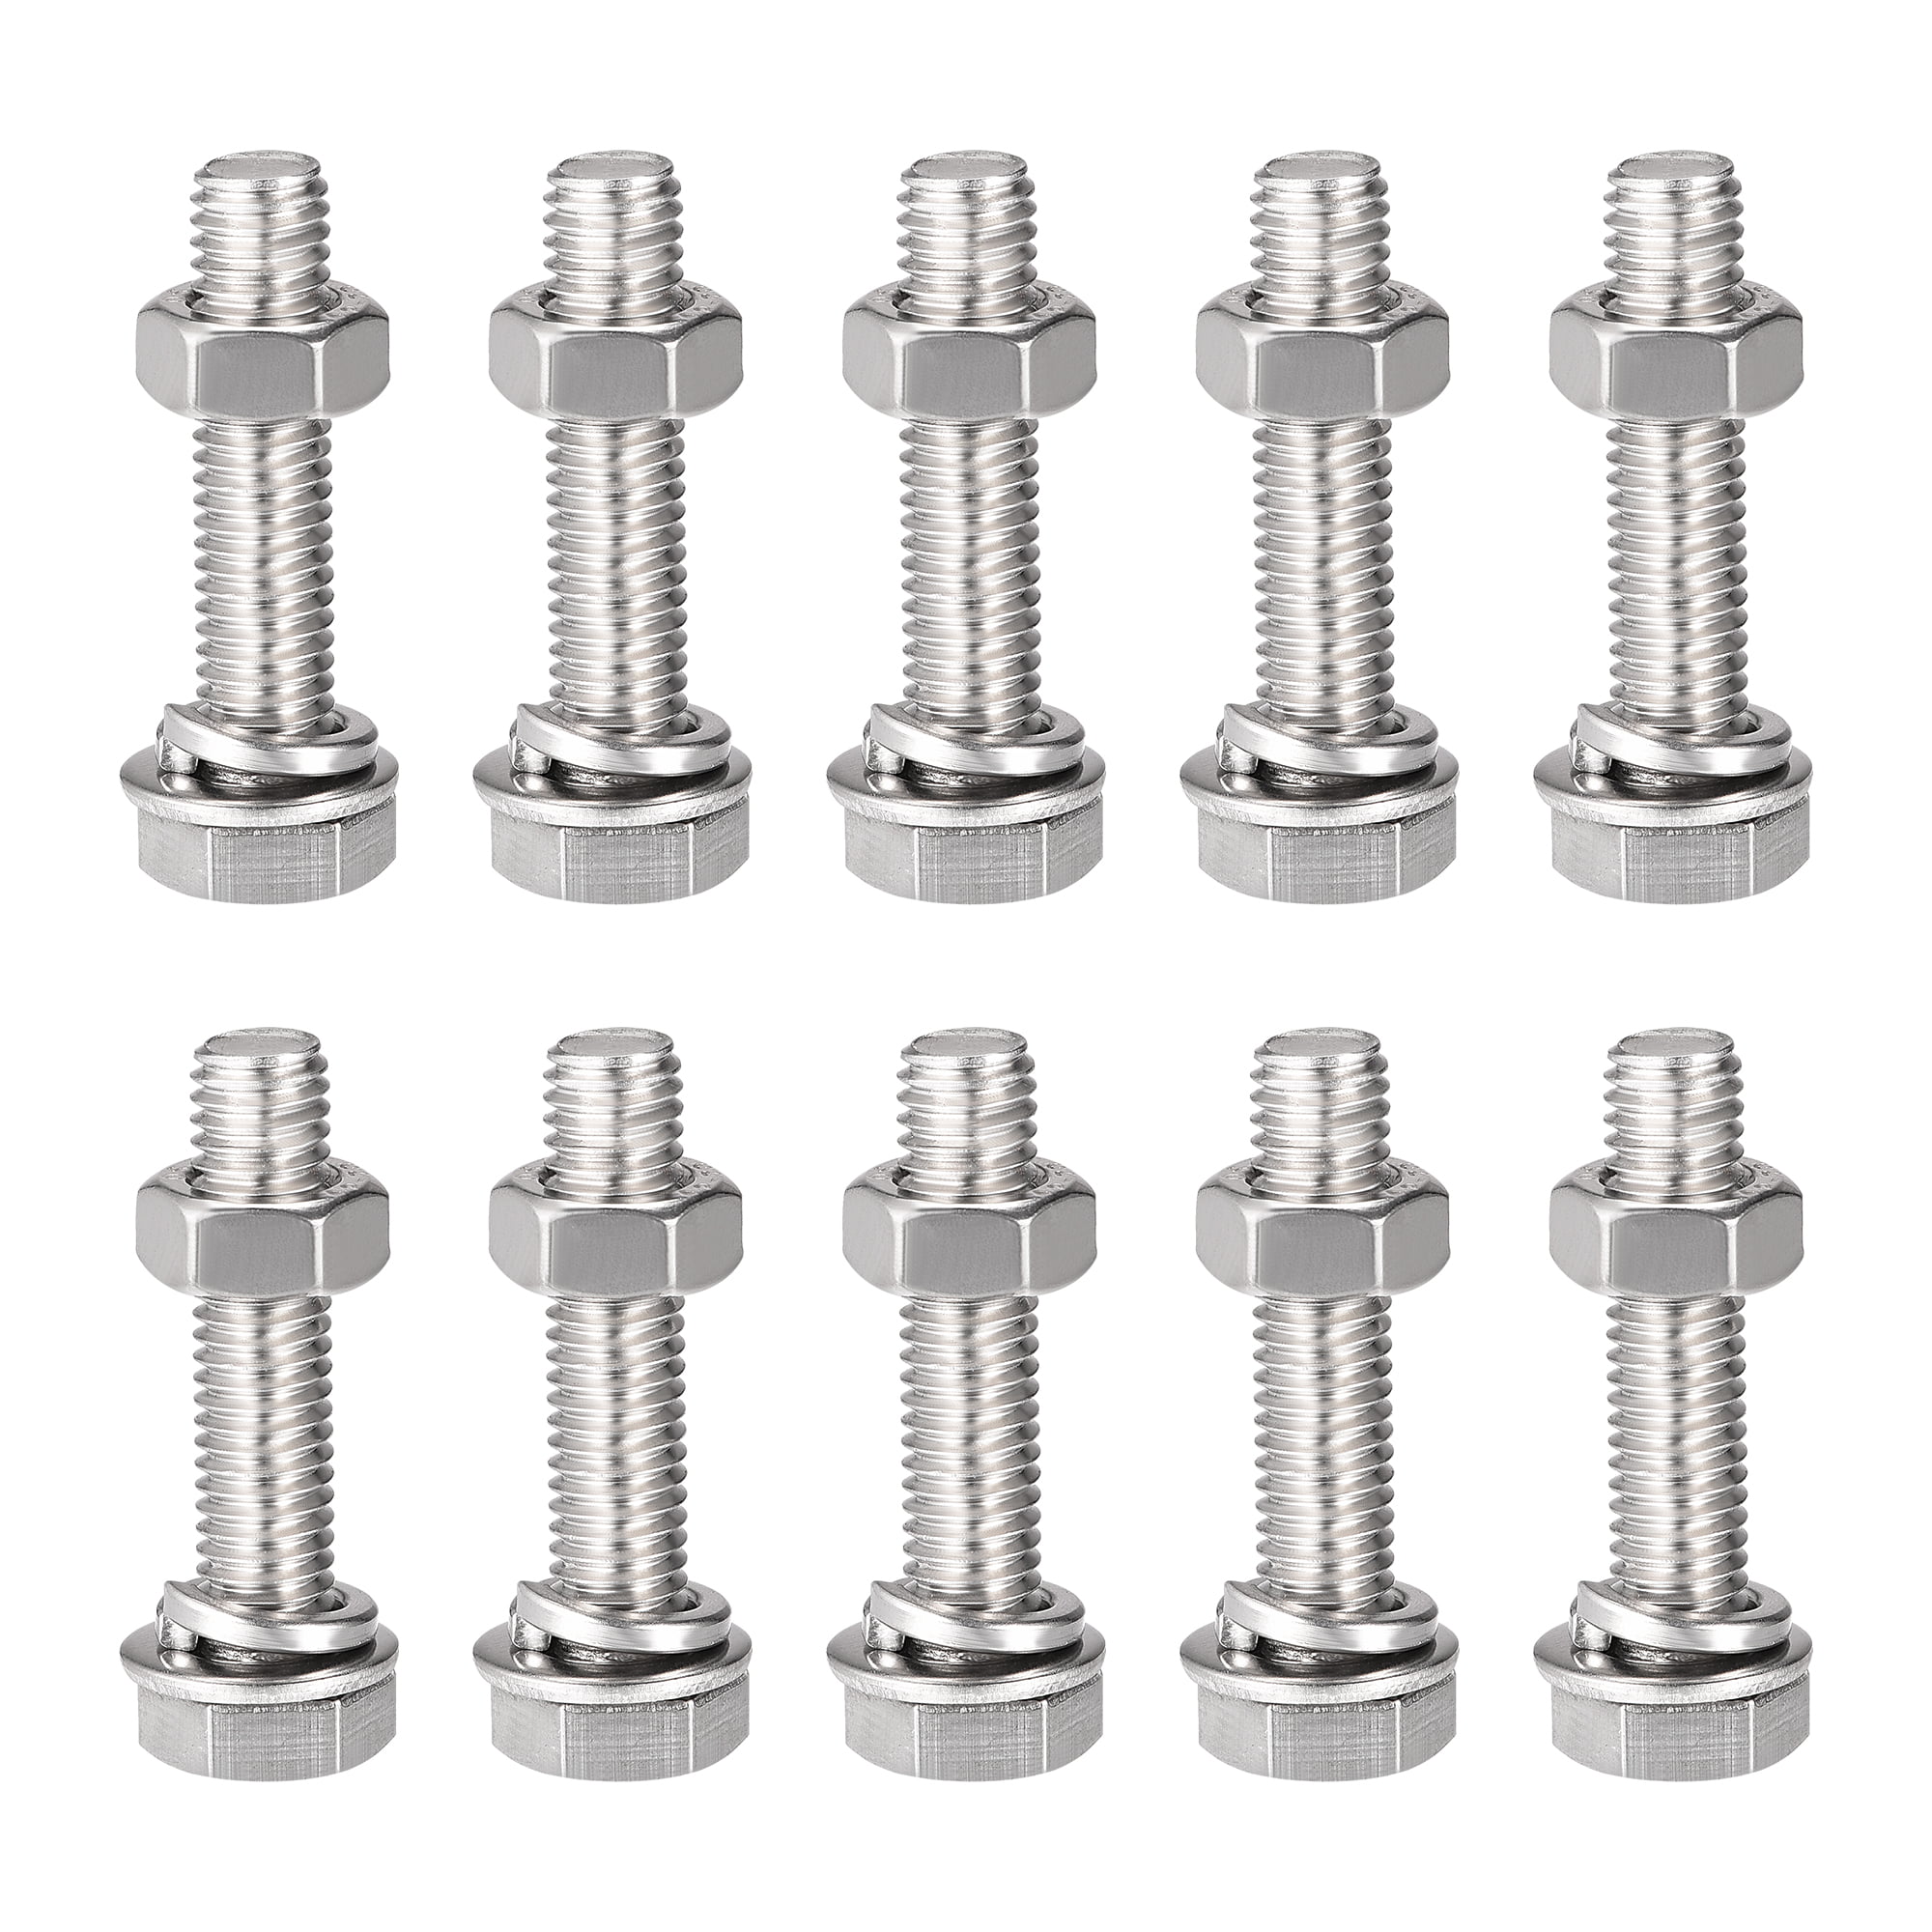 uxcell 10 Set M8x45mm 304 Stainless Steel Hex Bolts w Nuts and Washers Assortment Kit 